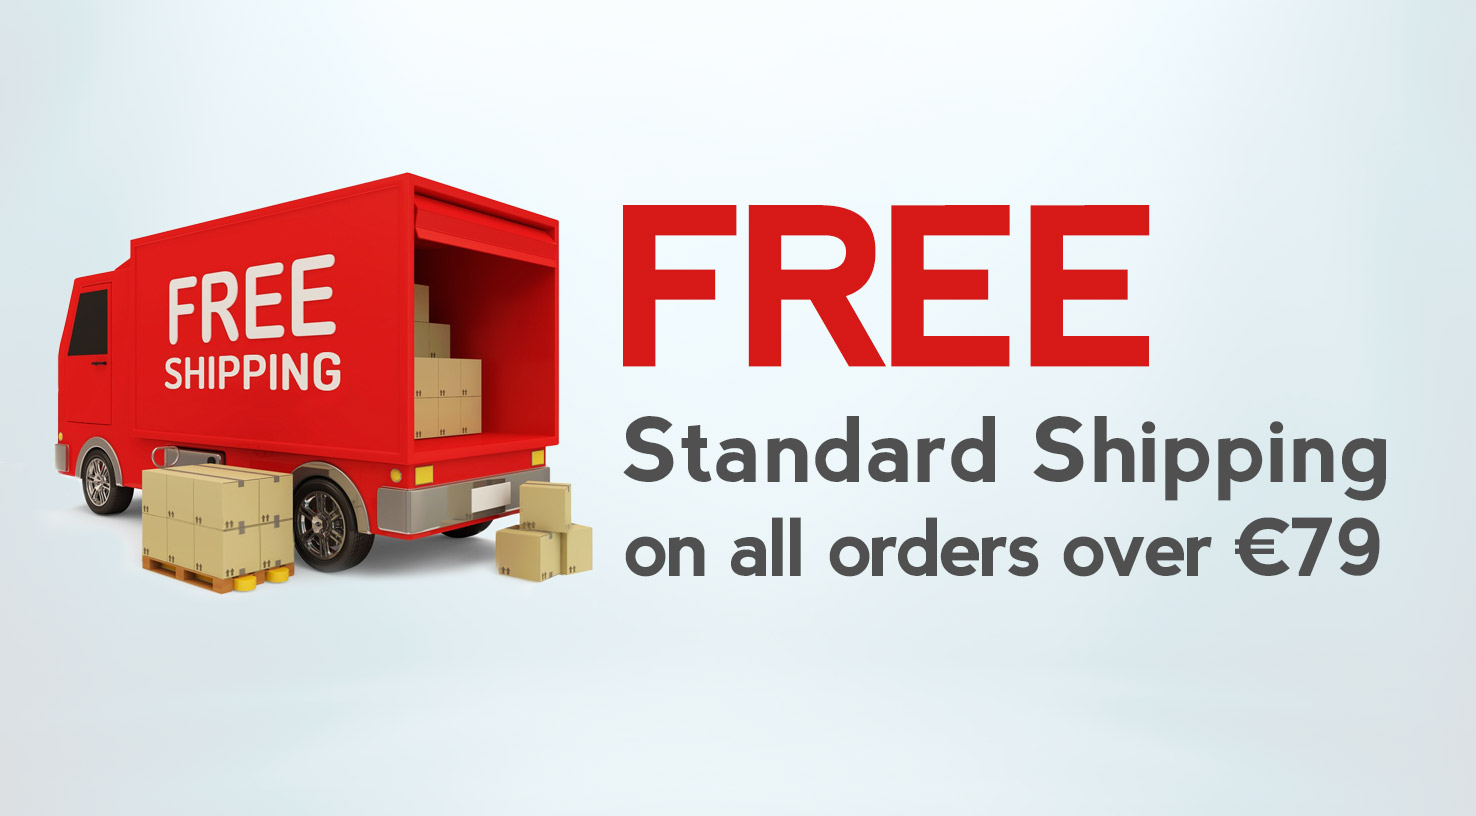 FREE Standard Shipping on orders over €49